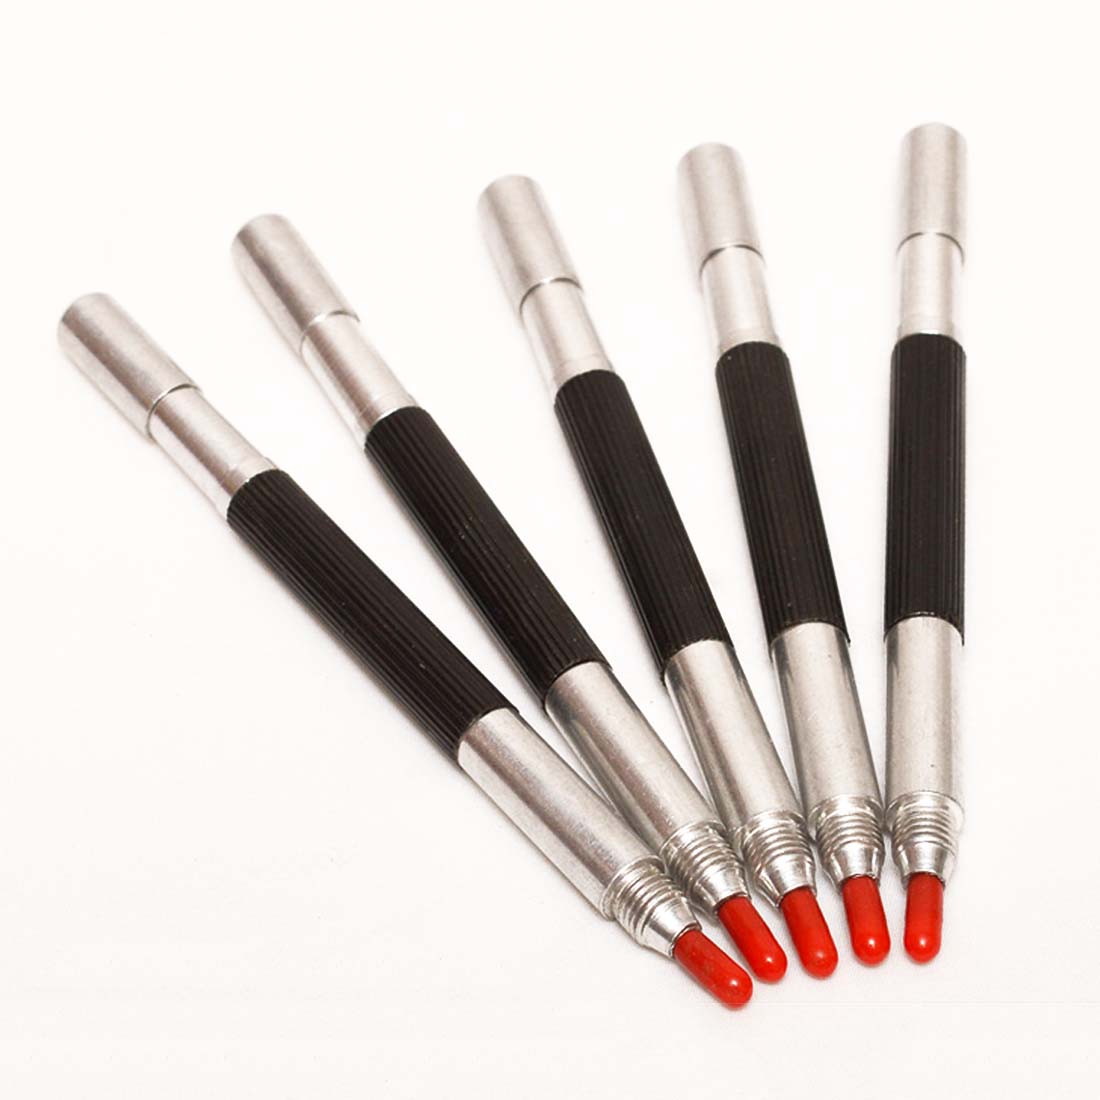 130mm Glass Ceramic Marker Double Headed Glass Tile Cutter Construction Tool Parts Machine Pen Glass knife Scriber